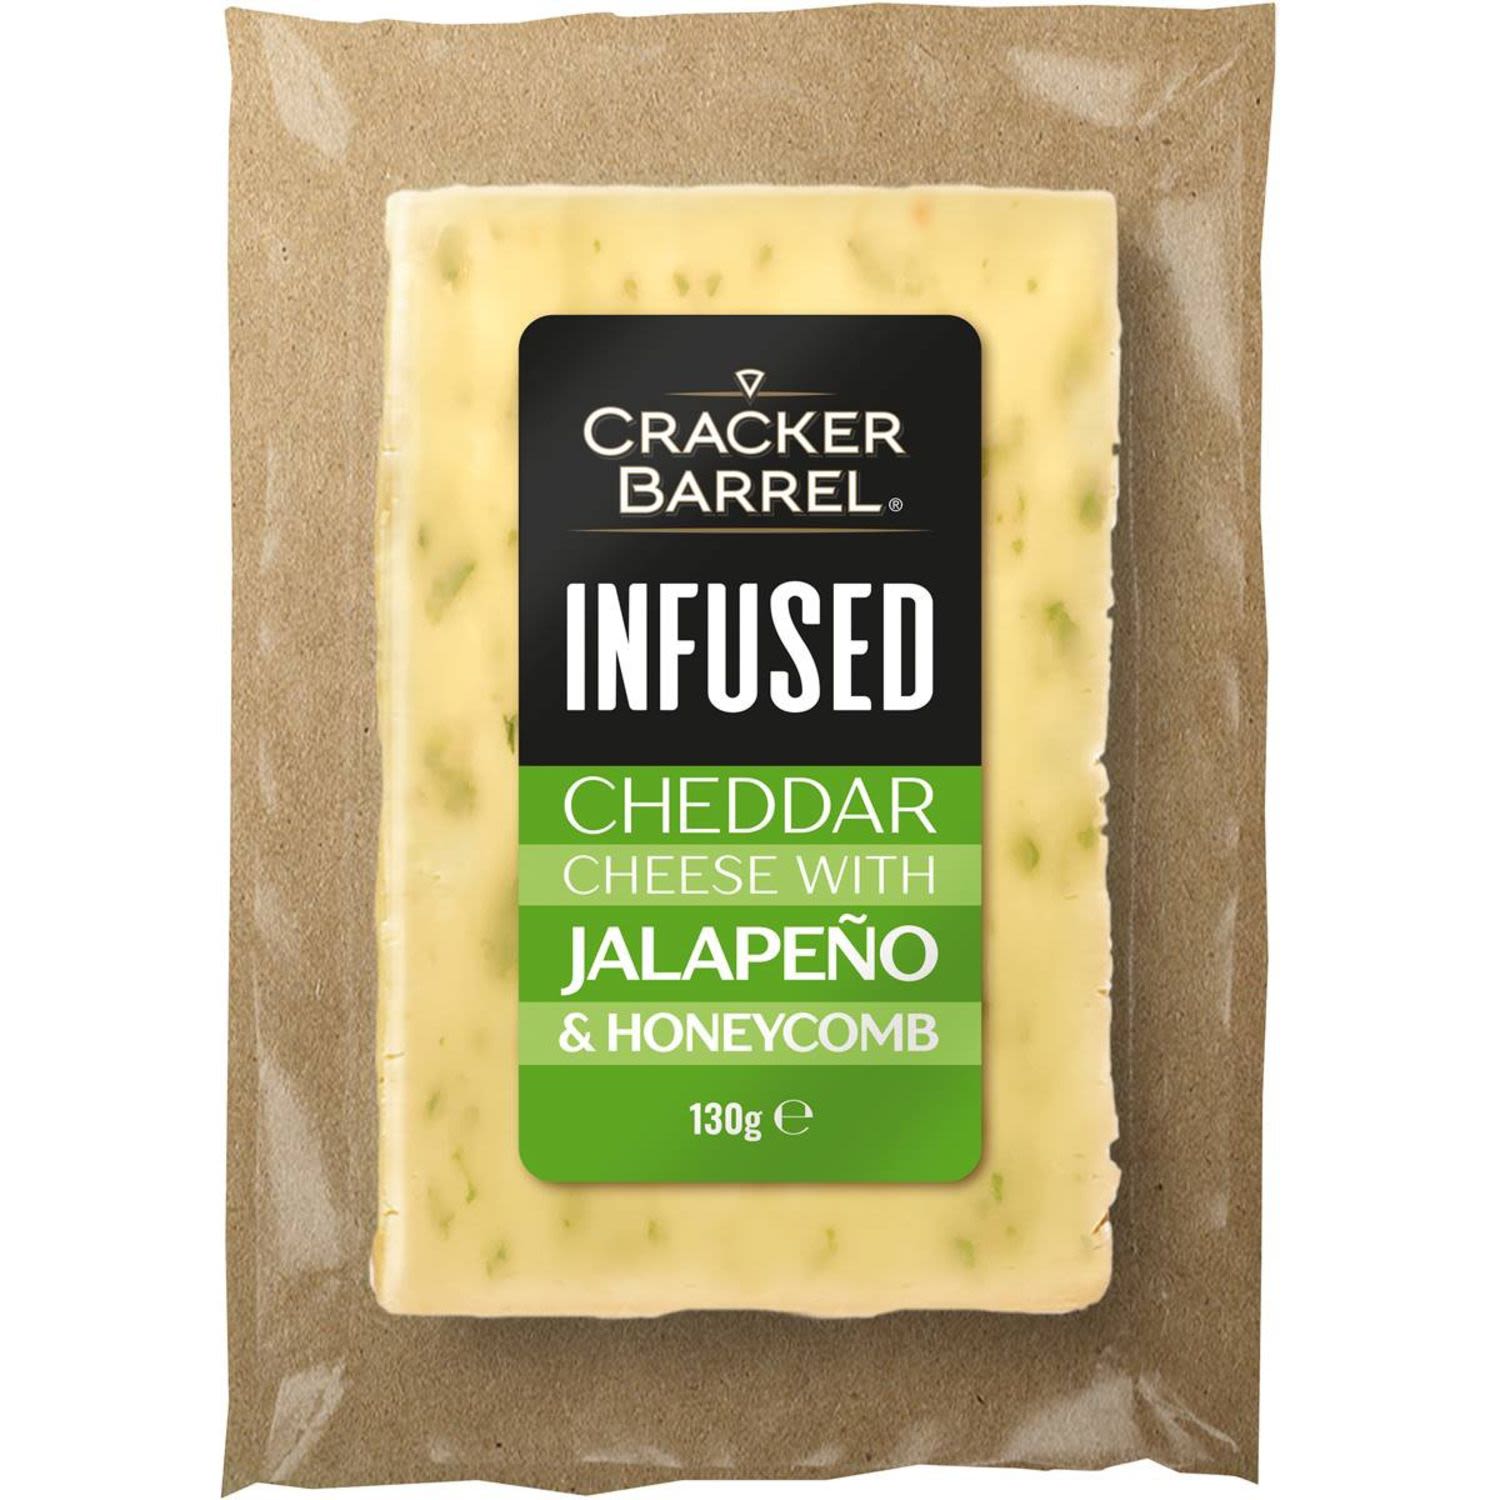 Cracker Barrel Infused Cheddar Cheese With Jalapeno And Honeycomb, 130 Gram